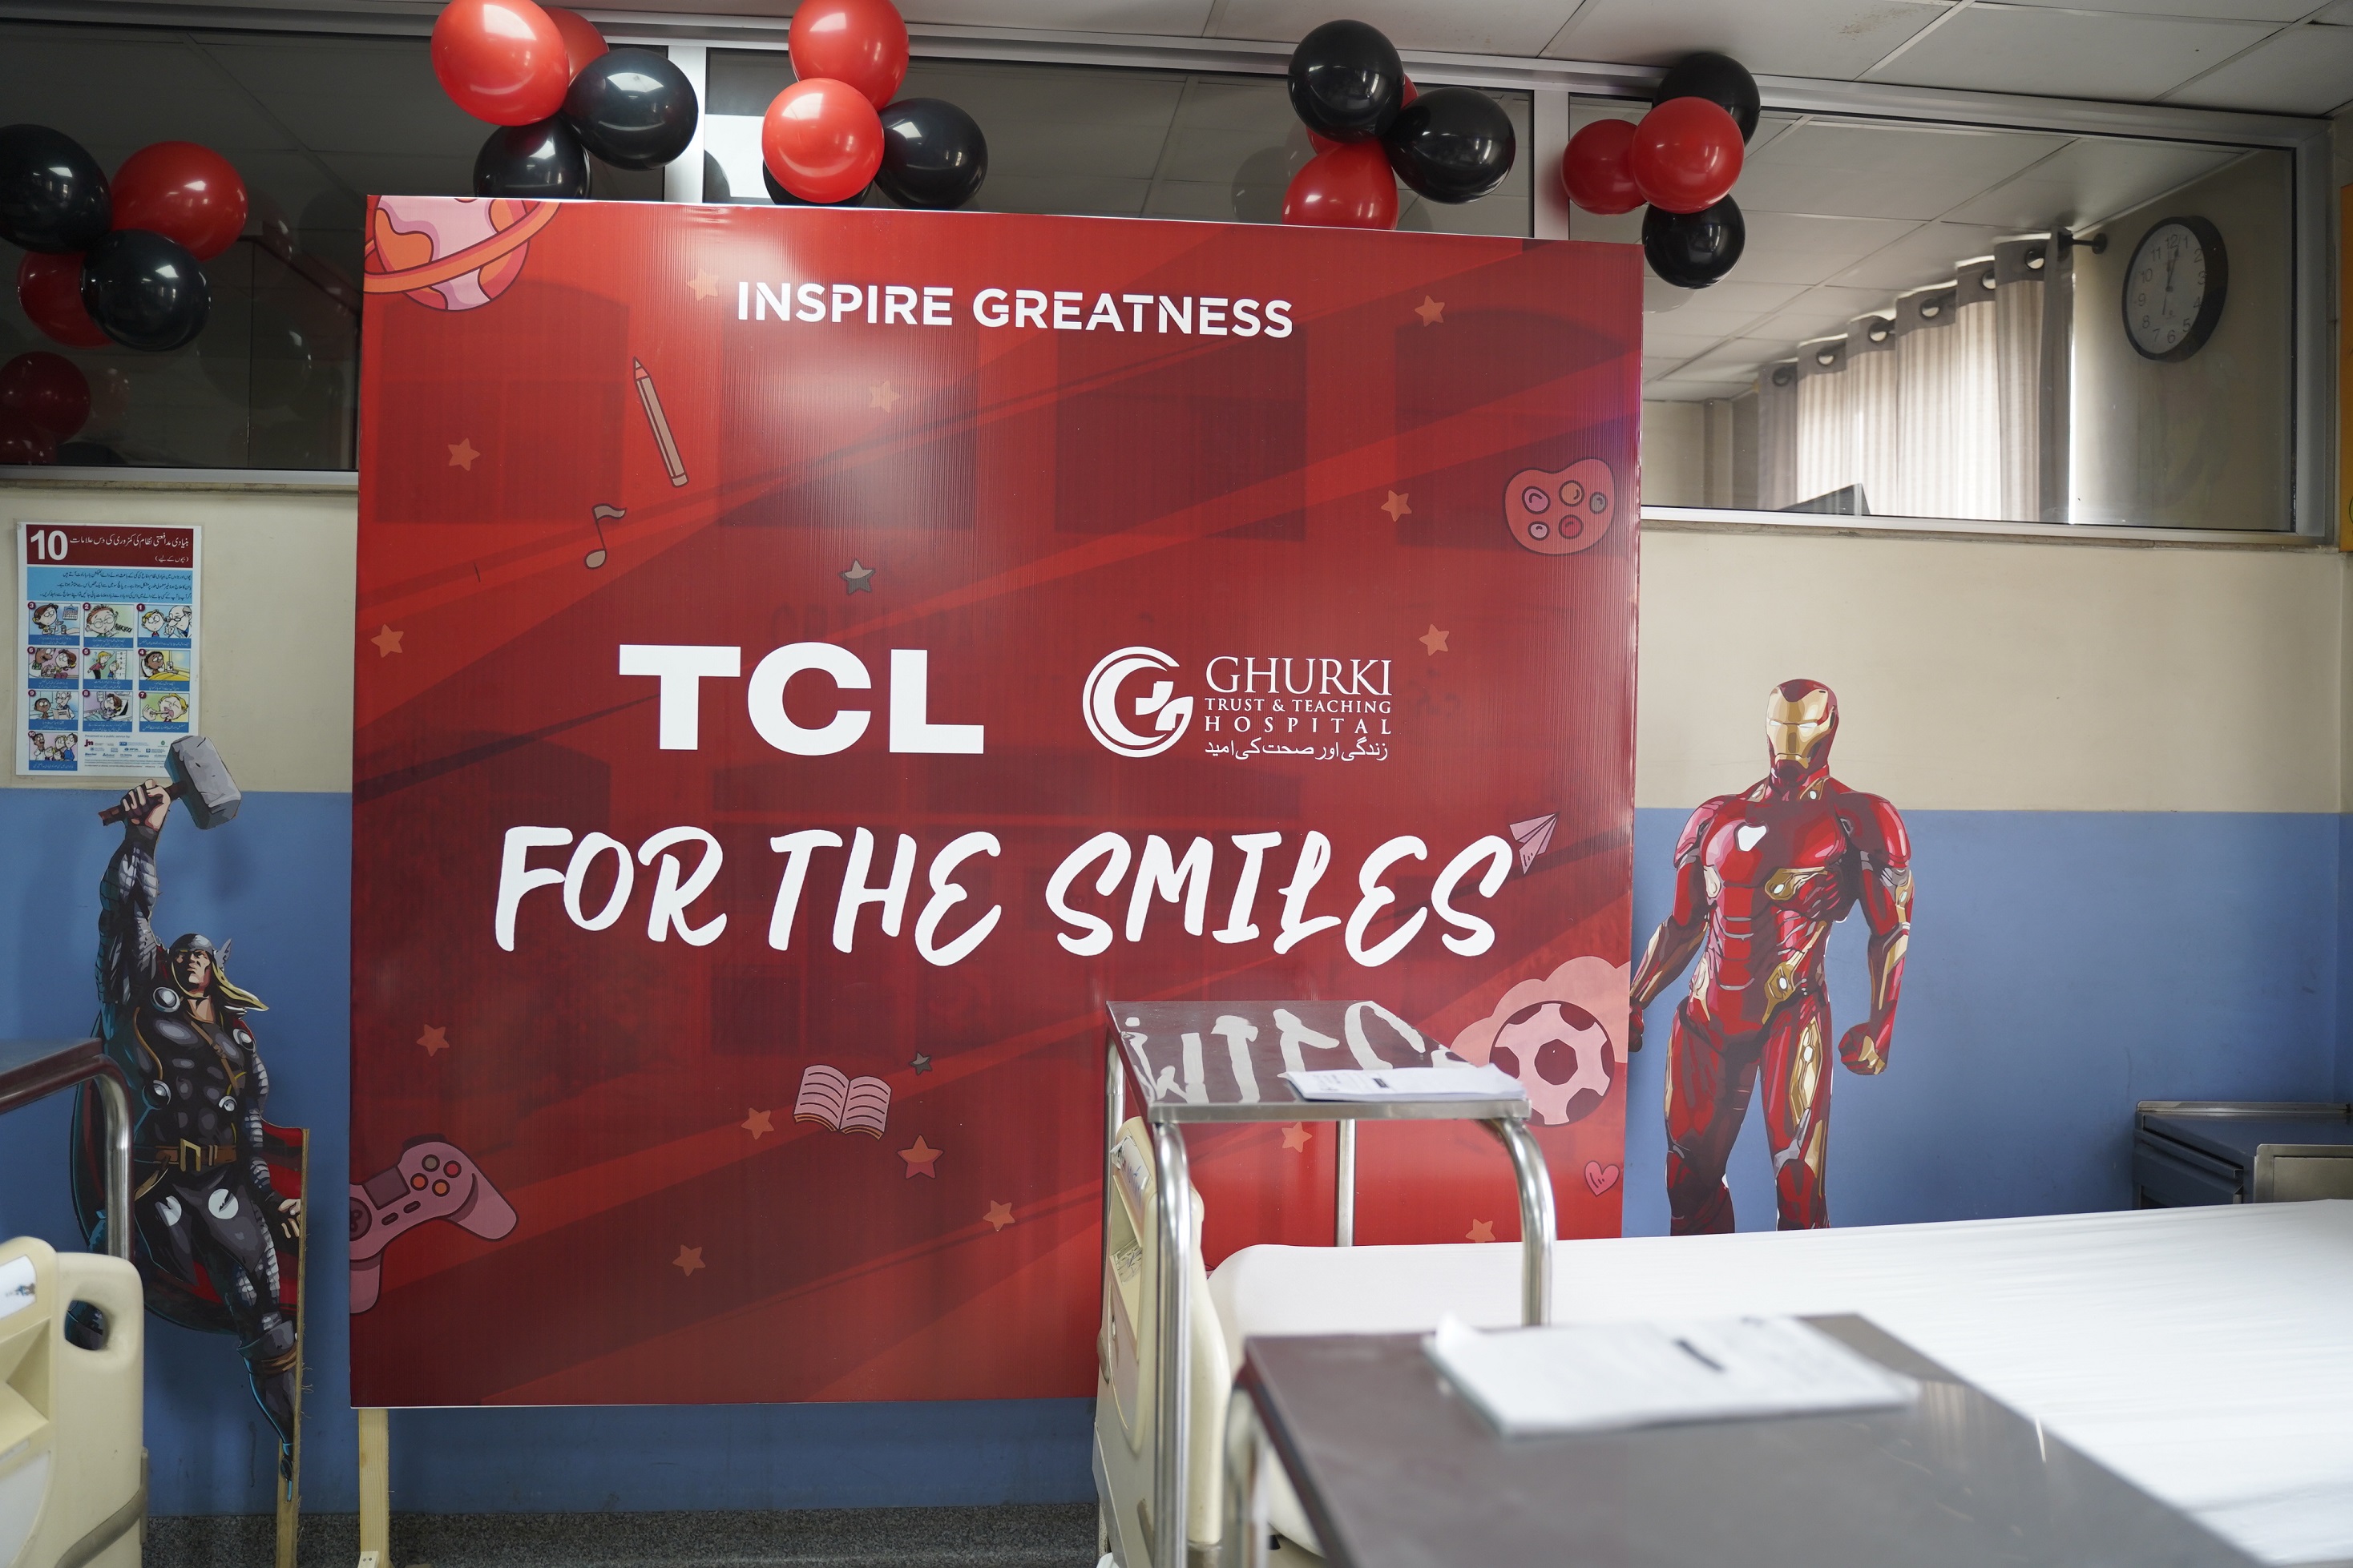 TCL JOINS HANDS WITH GHURKI HOSPITAL TO BRIGHTEN THE CHILDRENS WARD WITH GIFTS